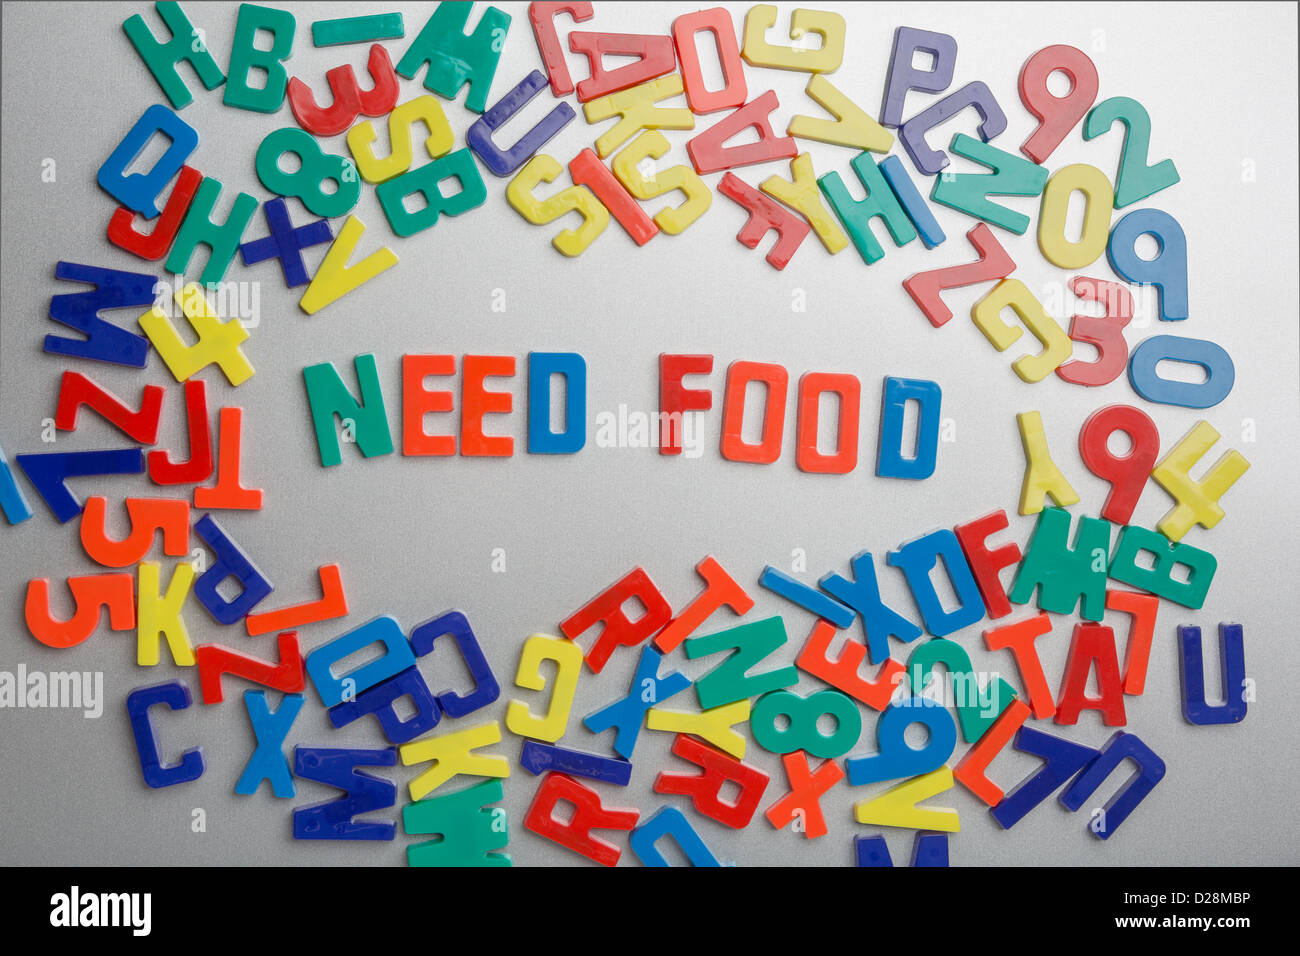 'Need Food ' - Refrigerator magnets spell messages out of a jumble of letters Stock Photo